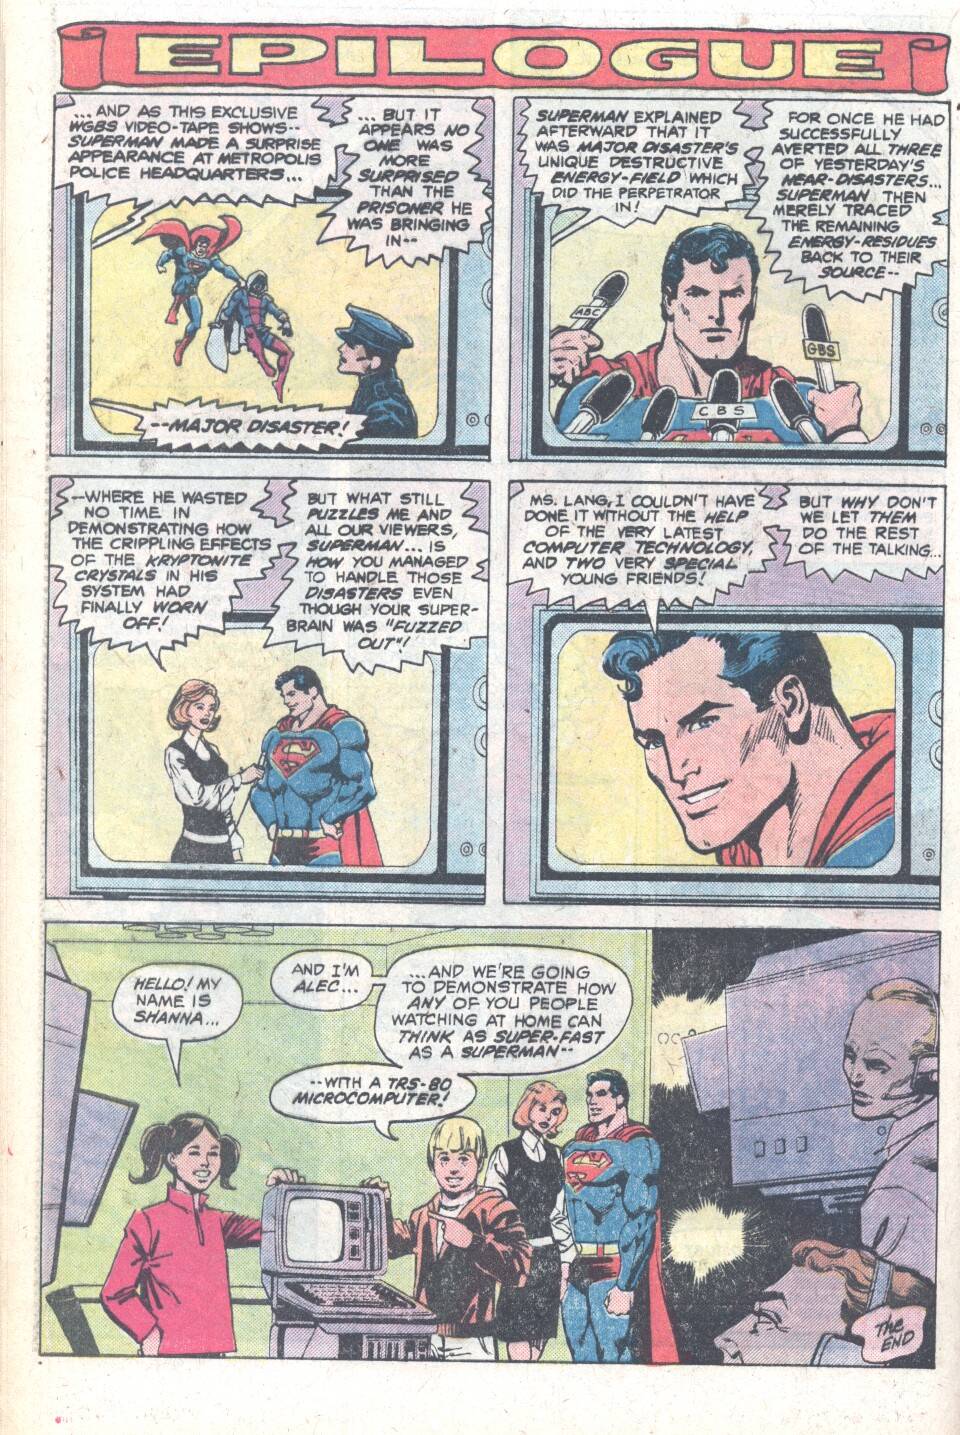 The New Adventures of Superboy 7 Page 39